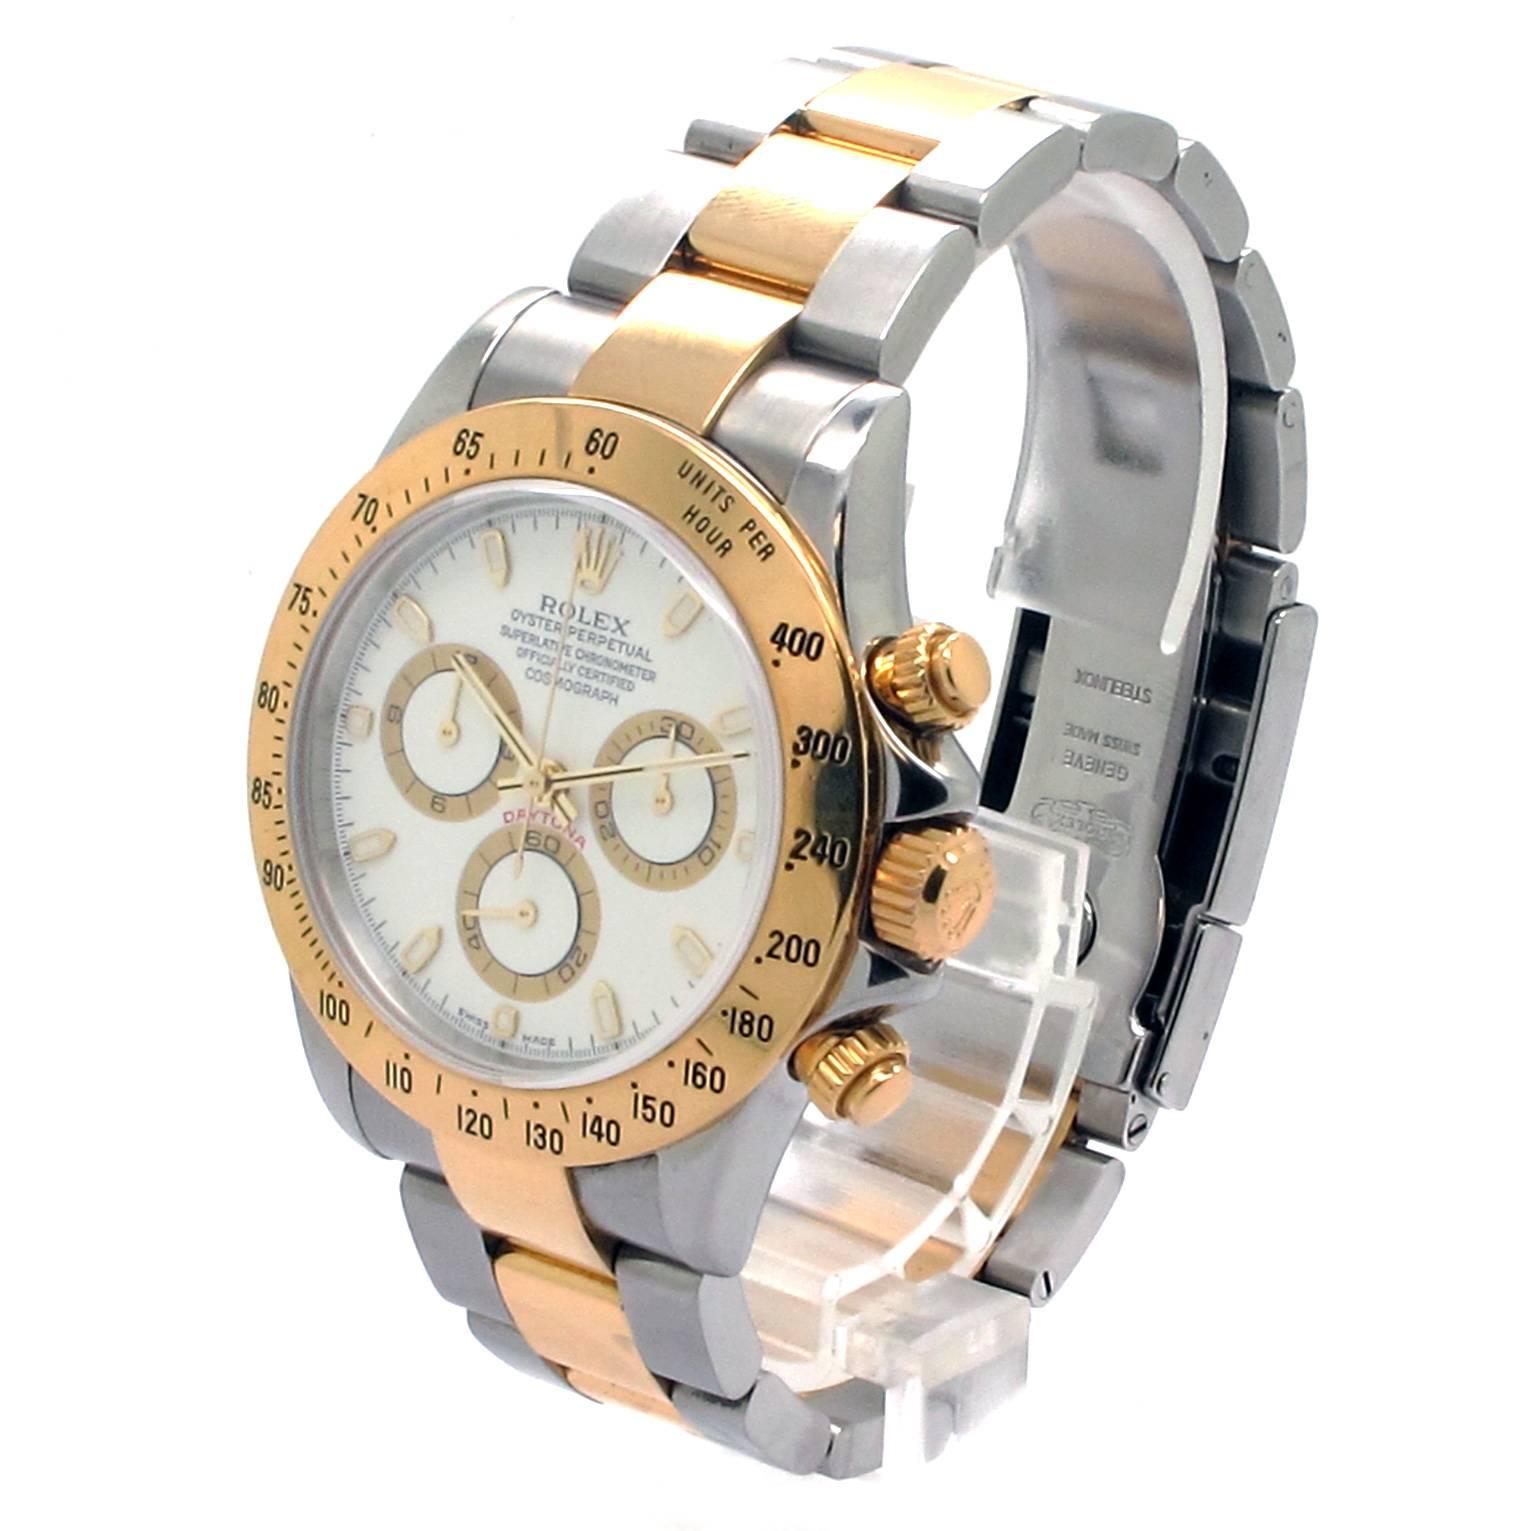 Rolex Daytona Cosmograph Two-Tone Men's Watch with a 40mm Stainless Steel Case. Fixed 18K Yellow Gold with engraved tachymetric scale Bezel. White Dial with luminous hands and Markers. 18K Yellow Gold and Stainless Steel Oyster Bracelet with Folding